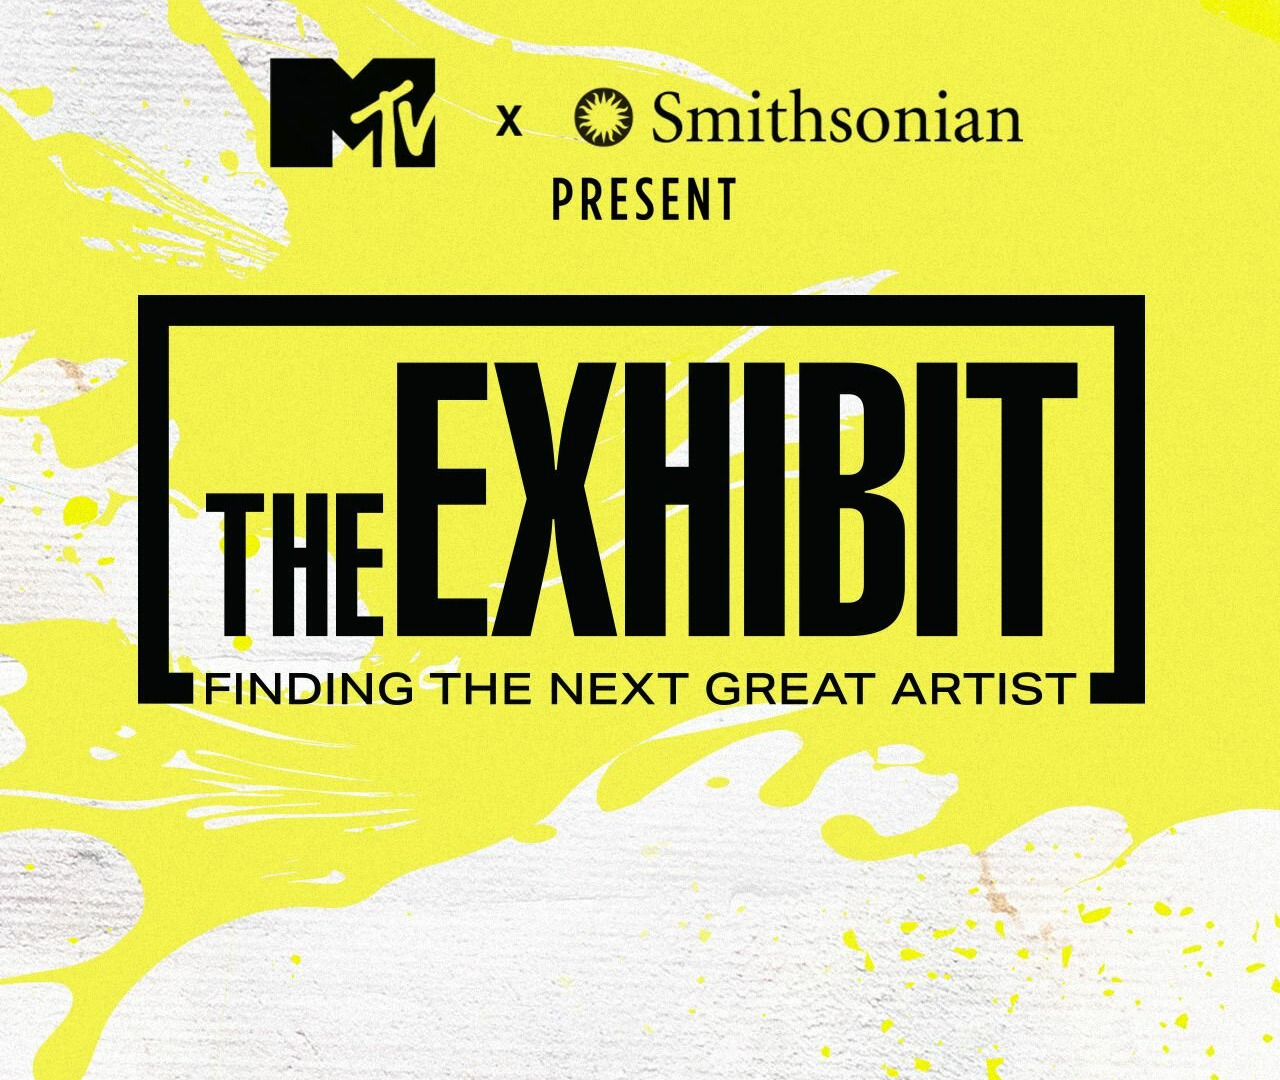 Show The Exhibit: Finding the Next Great Artist